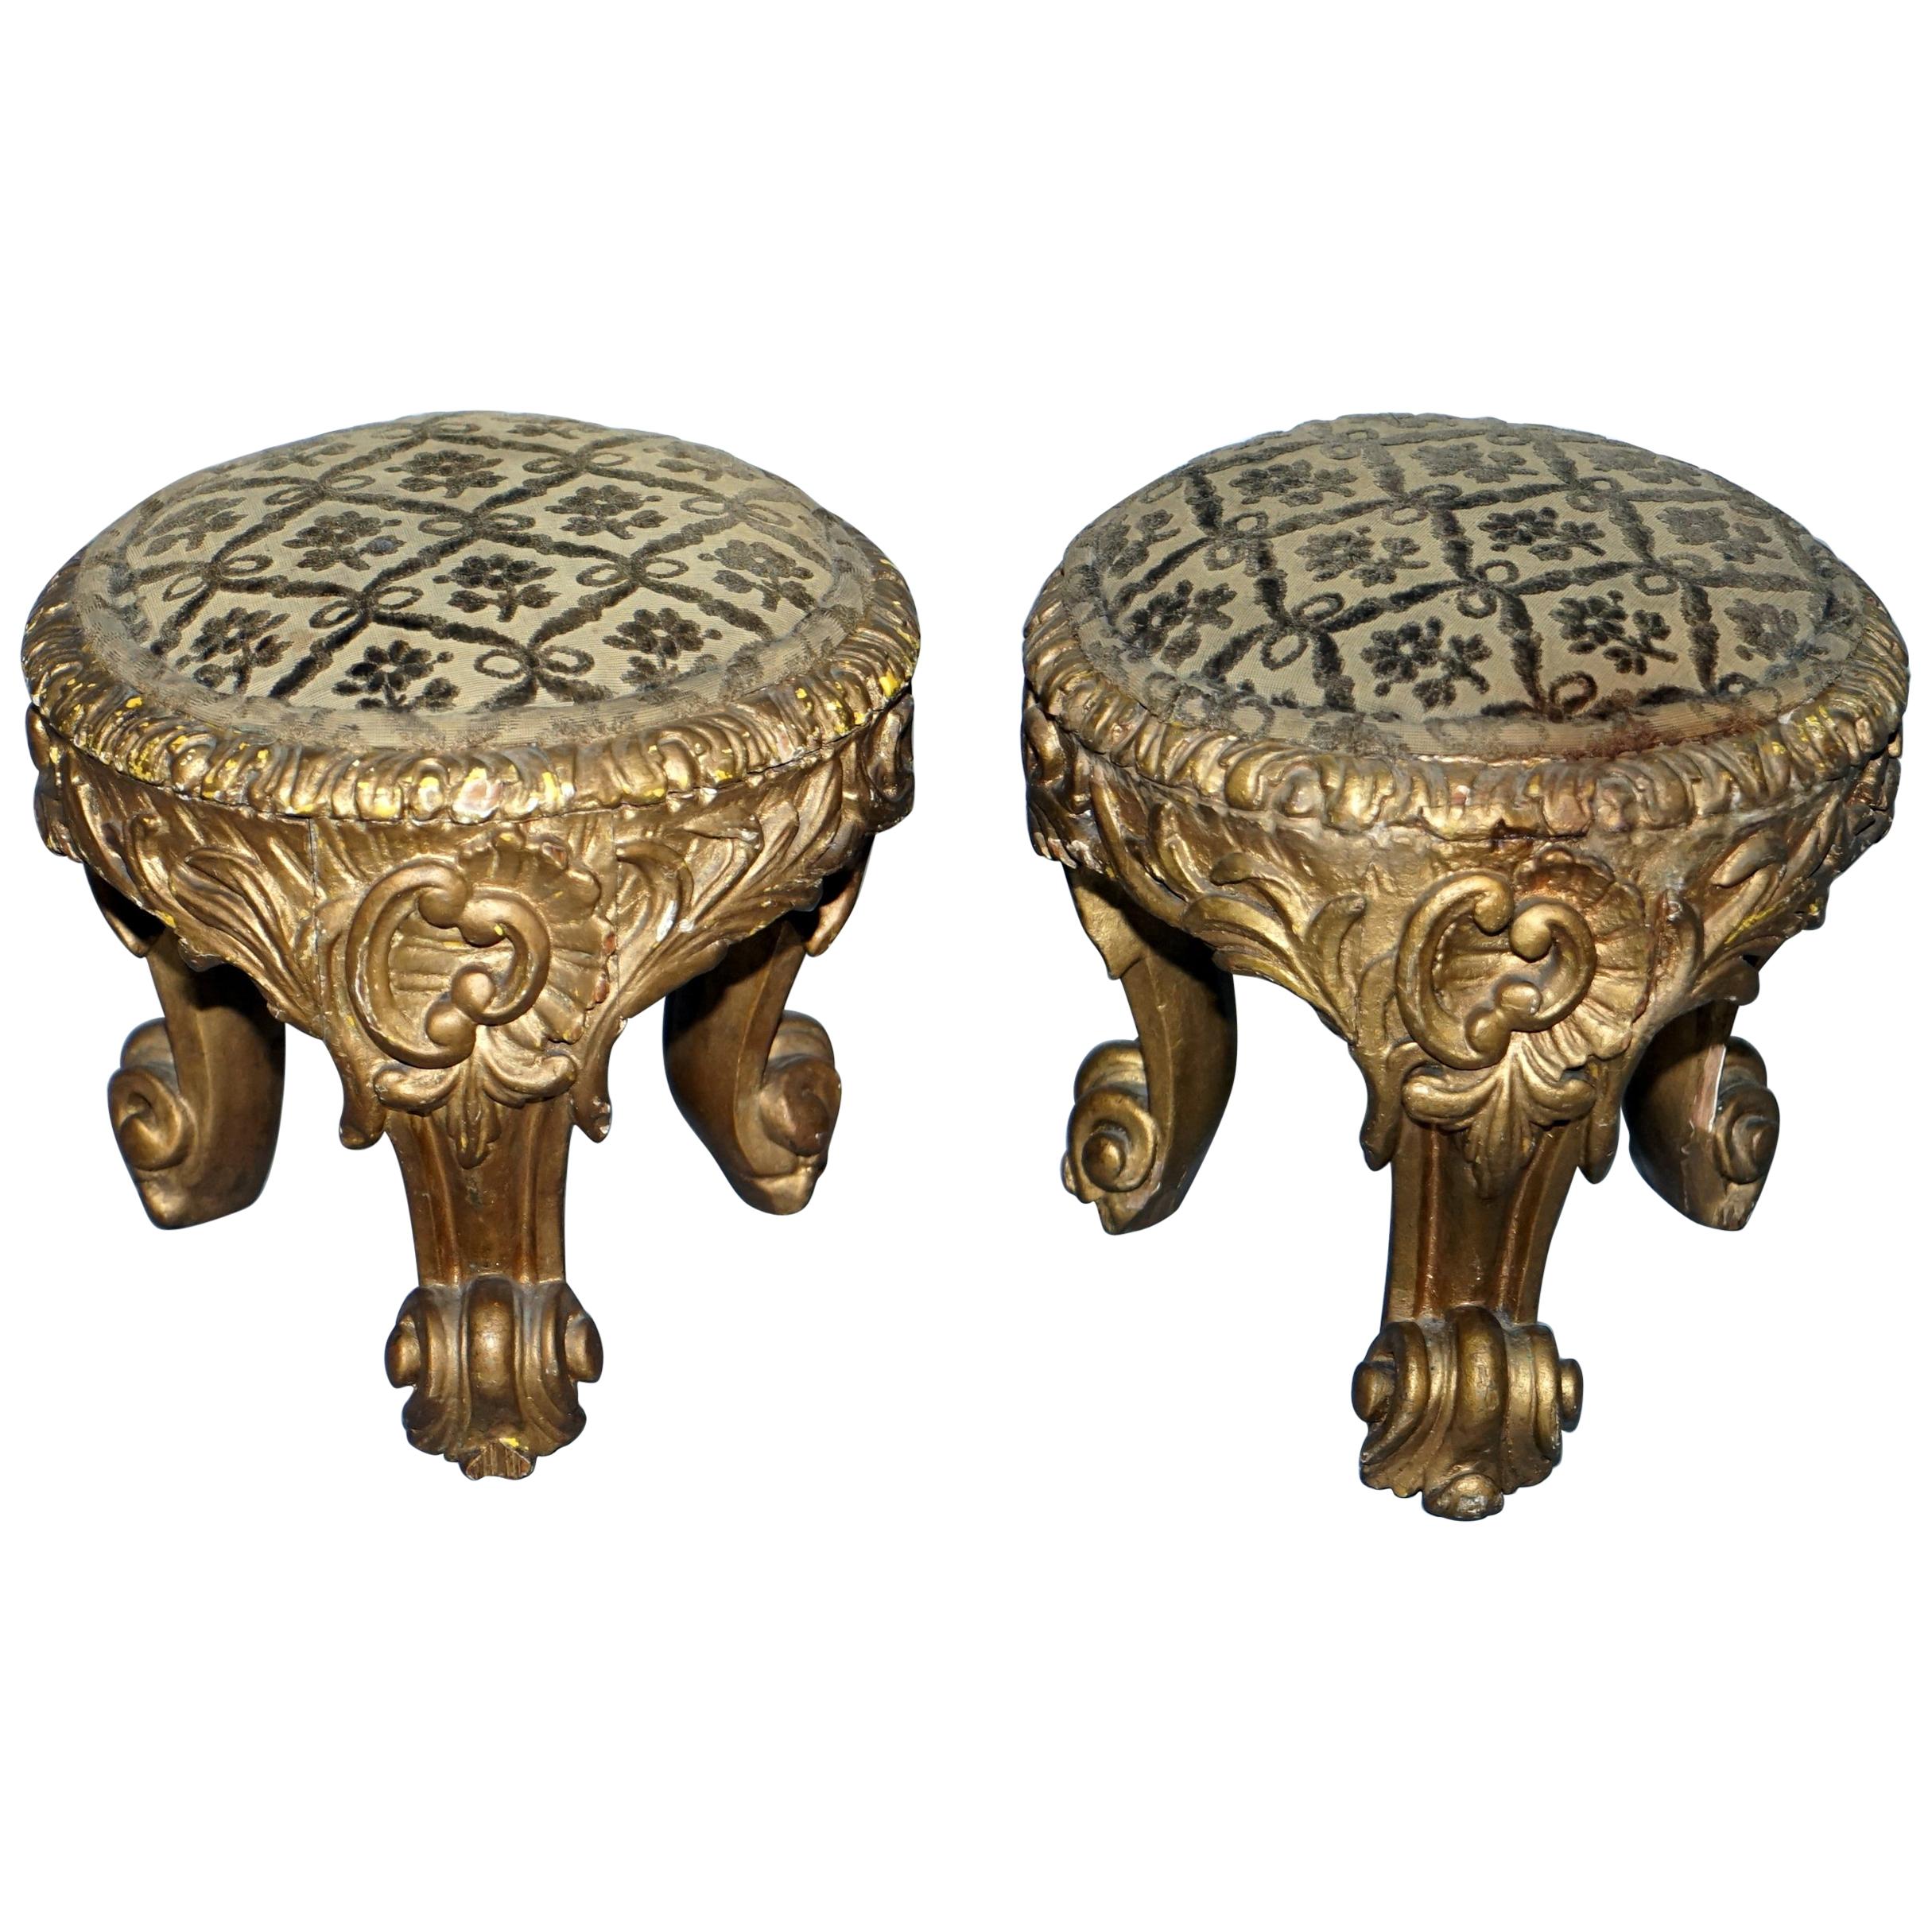 Rare Pair of Early 19th Century Italian Giltwood Stools Hand-Carved Solid Timber